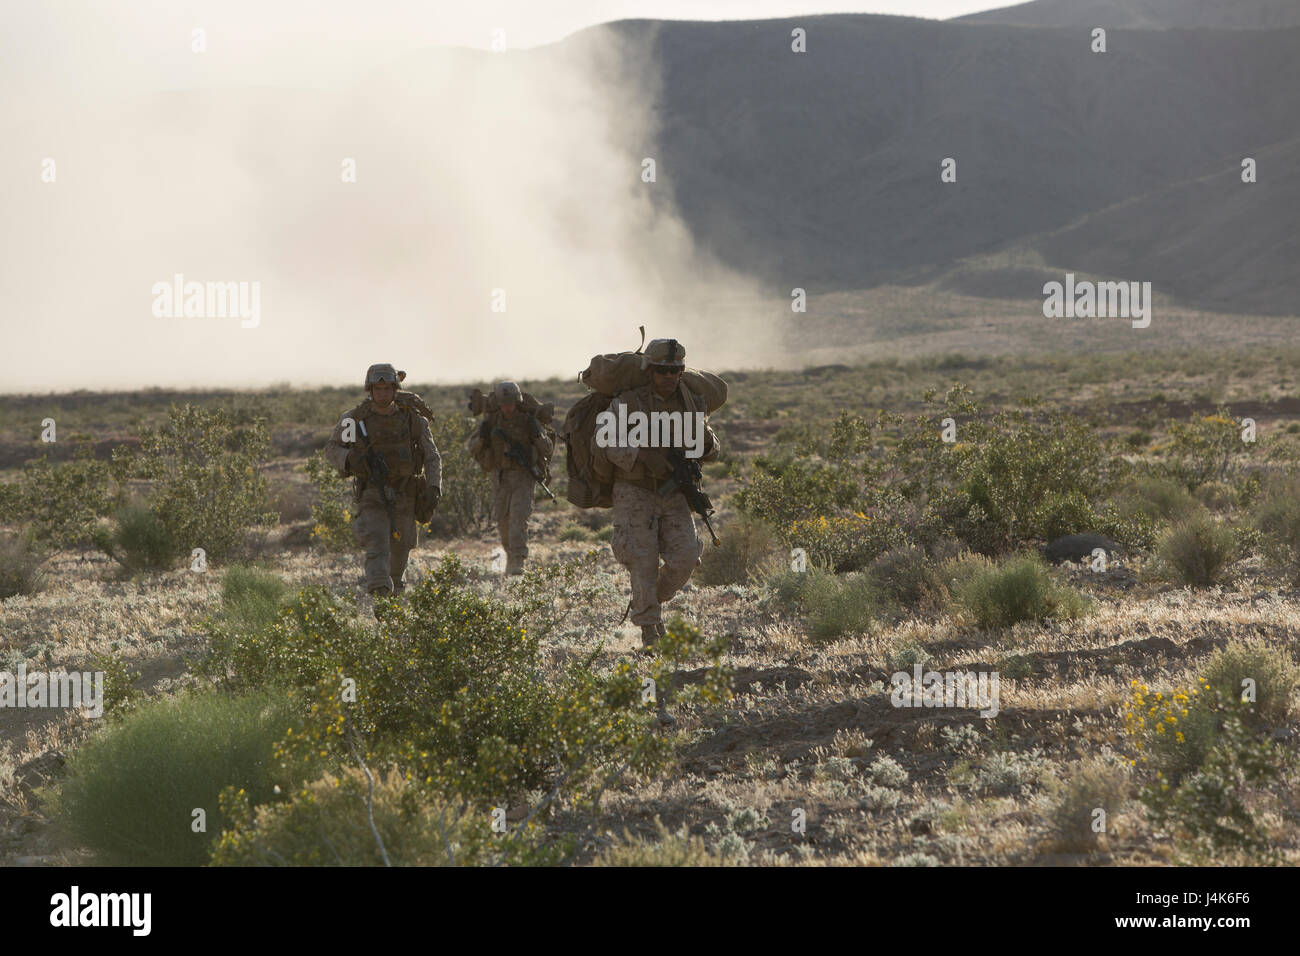 U.S. Marines with 2nd Battalion, 6th Marine Regiment, 2nd Marine Division (2d MARDIV), advance toward their objective following an insert from CH-53E Super Stallions during Talon Exercise (TalonEx) 2-17, Yuma, A.Z., April 25, 2017. The purpose of TalonEx was for ground combat units to conduct integrated training in support of the Weapons and Tactics Instructor Course (WTI) 2-17 hosted by Marine Aviation Weapons and Tactics Squadron One (MAWTS-1). Stock Photo